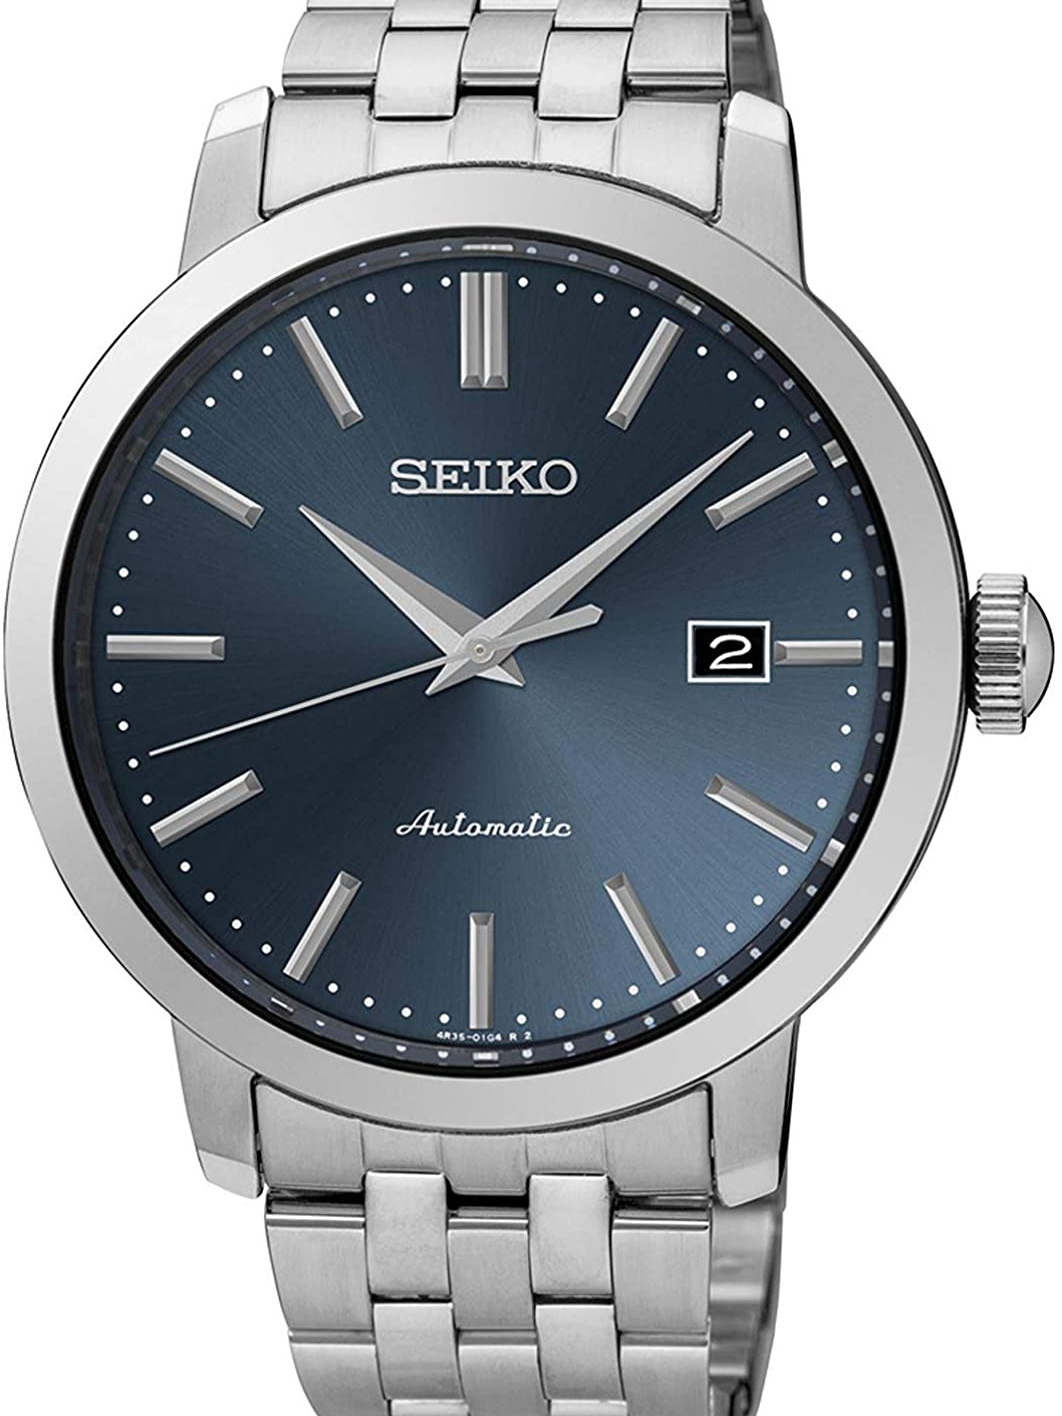 Seiko SRPA25K1 Automatic 4R35 23 Jewels - Smile Watch